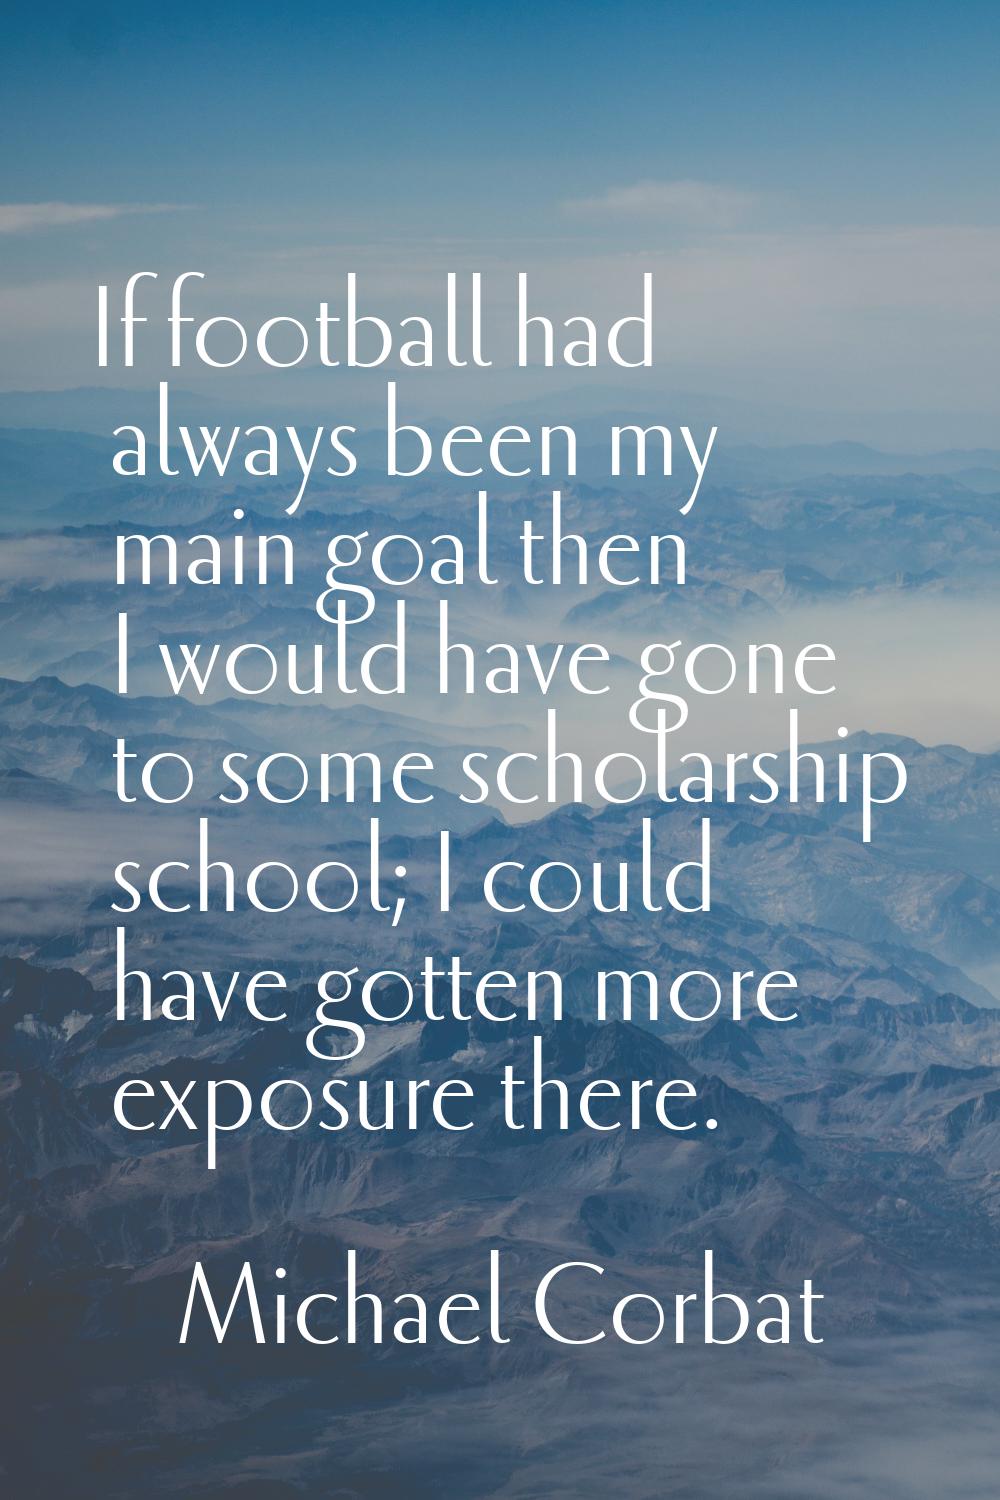 If football had always been my main goal then I would have gone to some scholarship school; I could